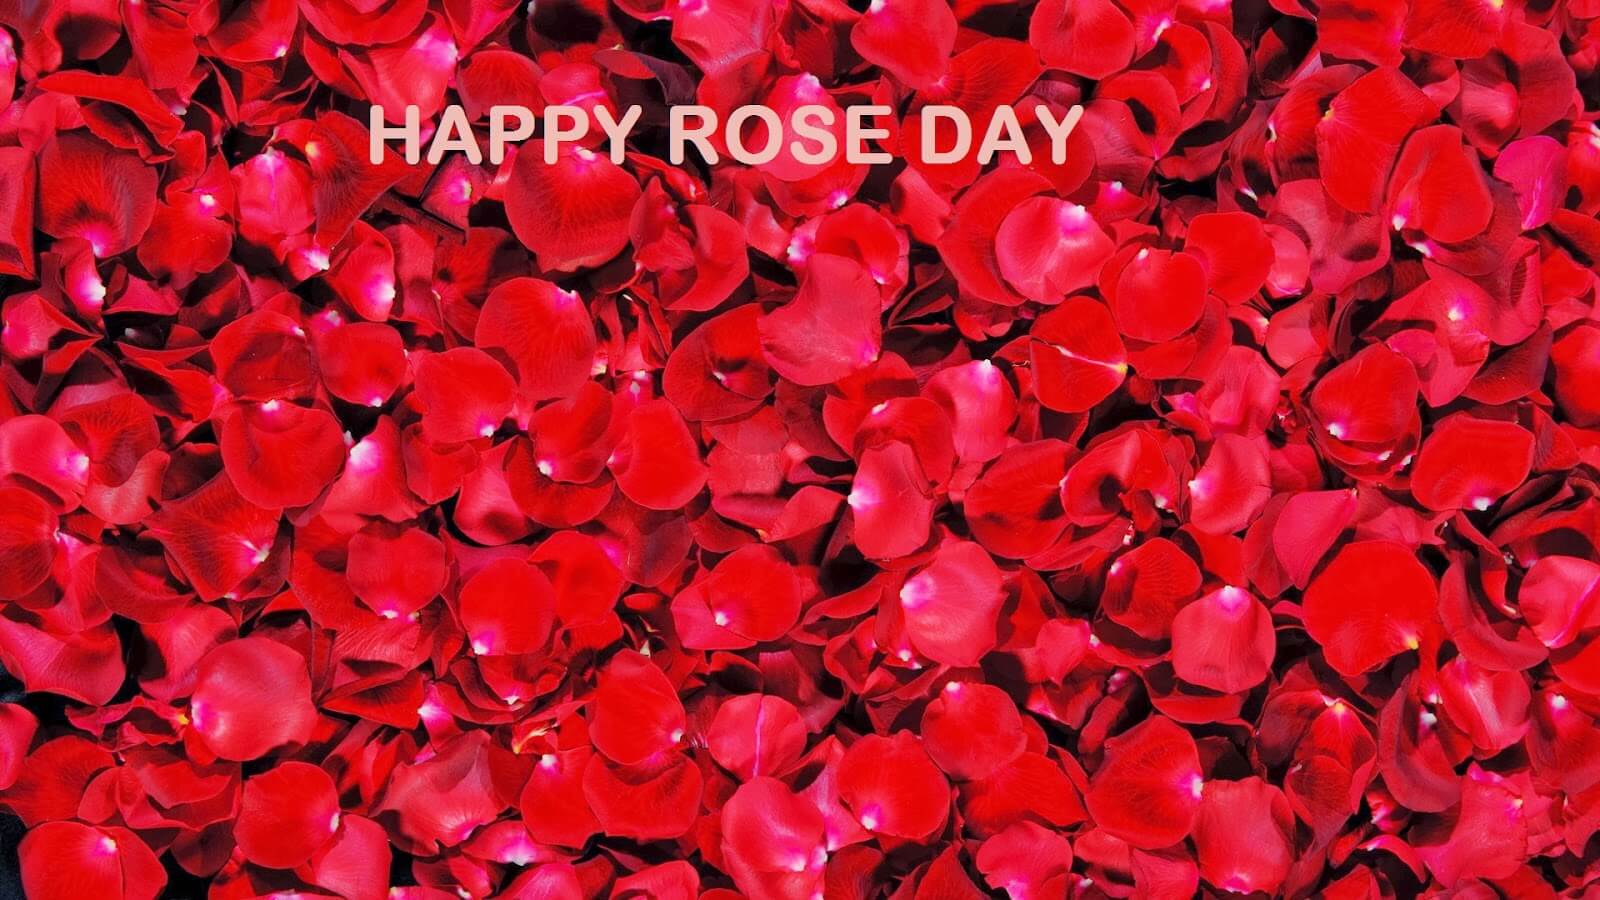 Rose Day Wallpaper - Rose Day Image 2017 , HD Wallpaper & Backgrounds